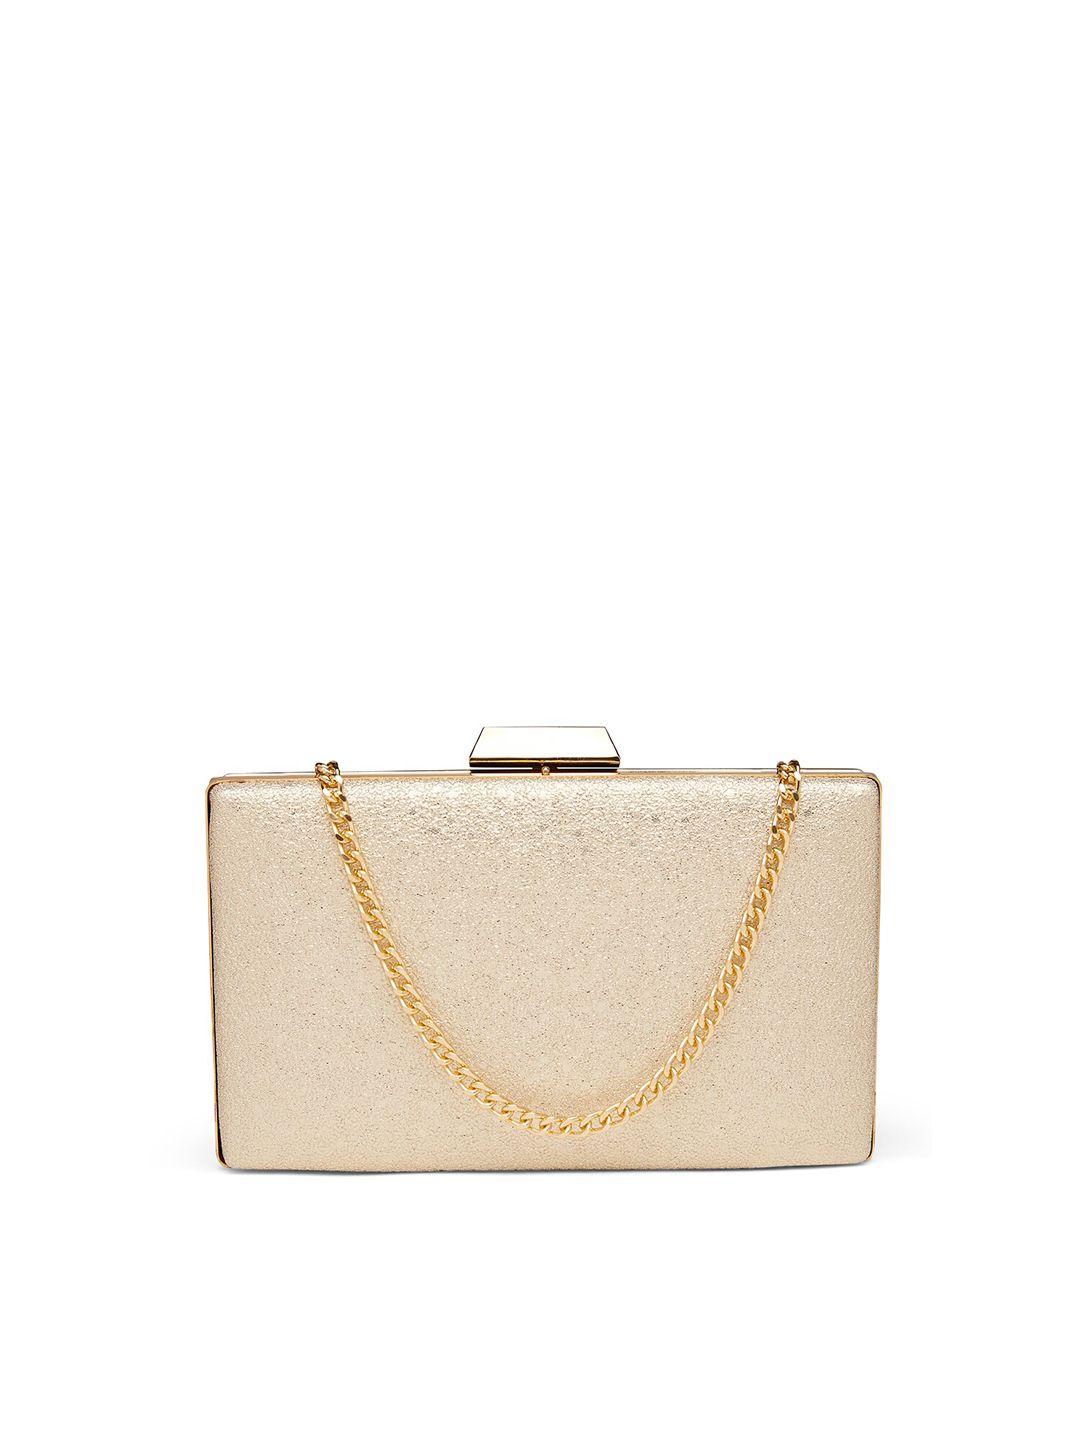 vdesi gold-toned solid clutch